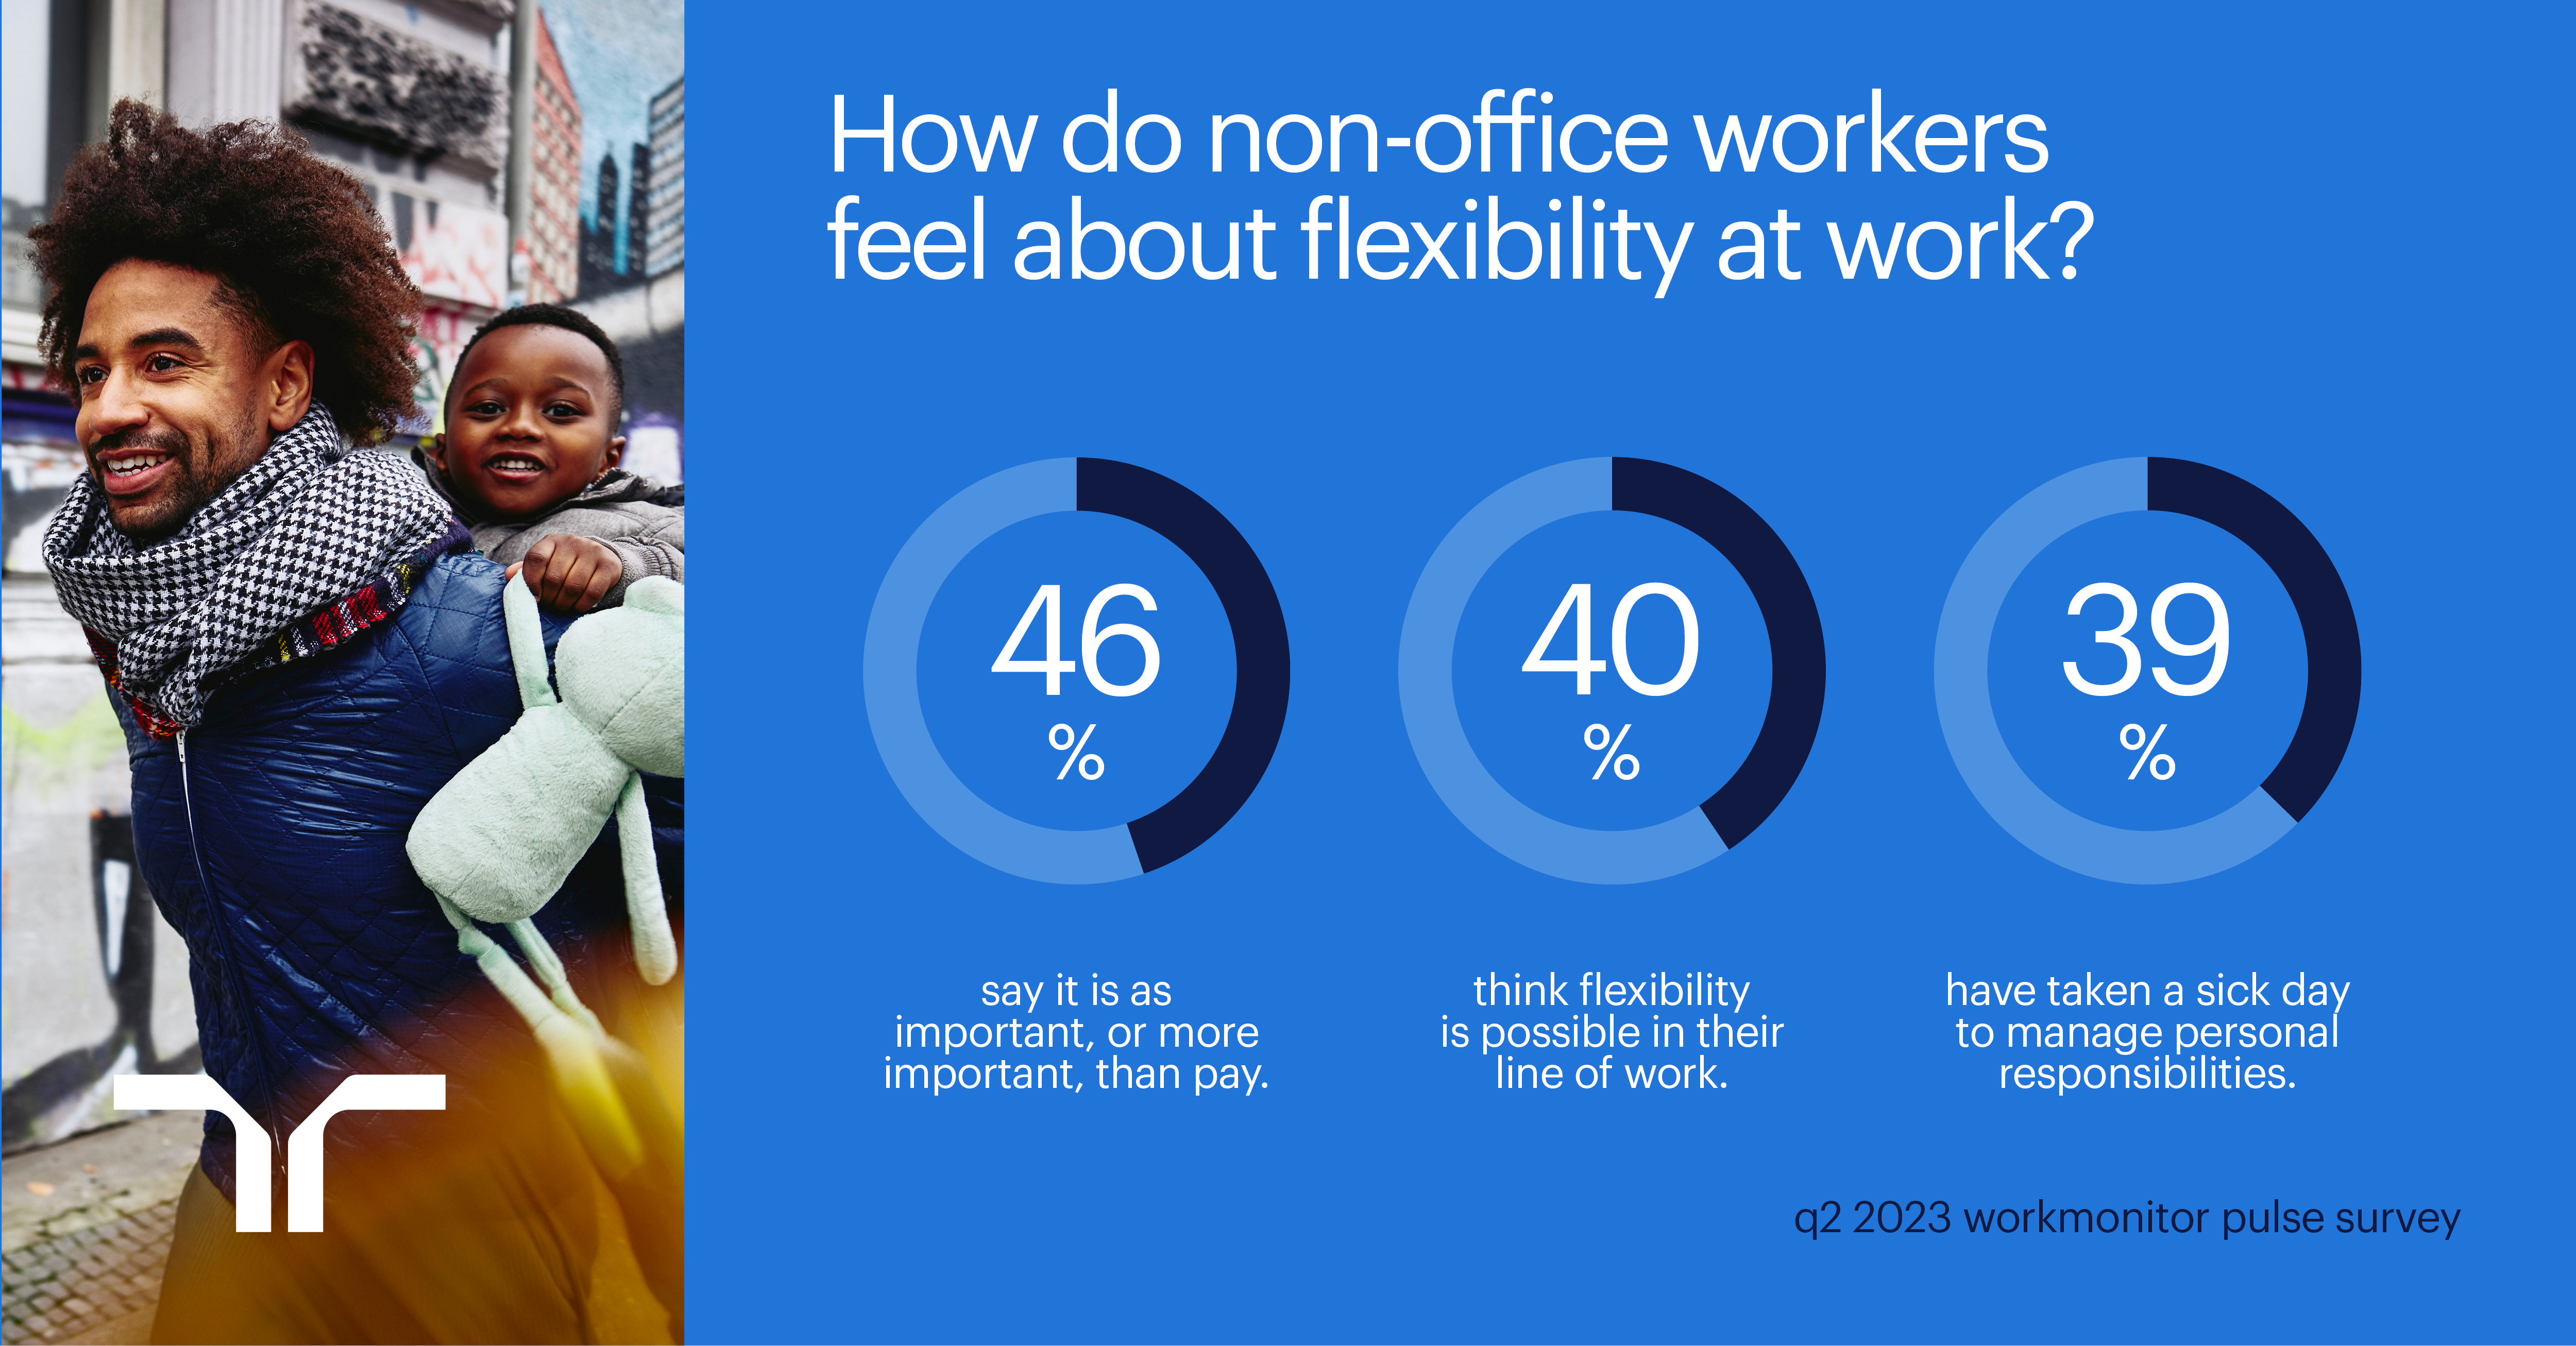 Now, three in five non-office workers think that flexibility is possible in their line of work.